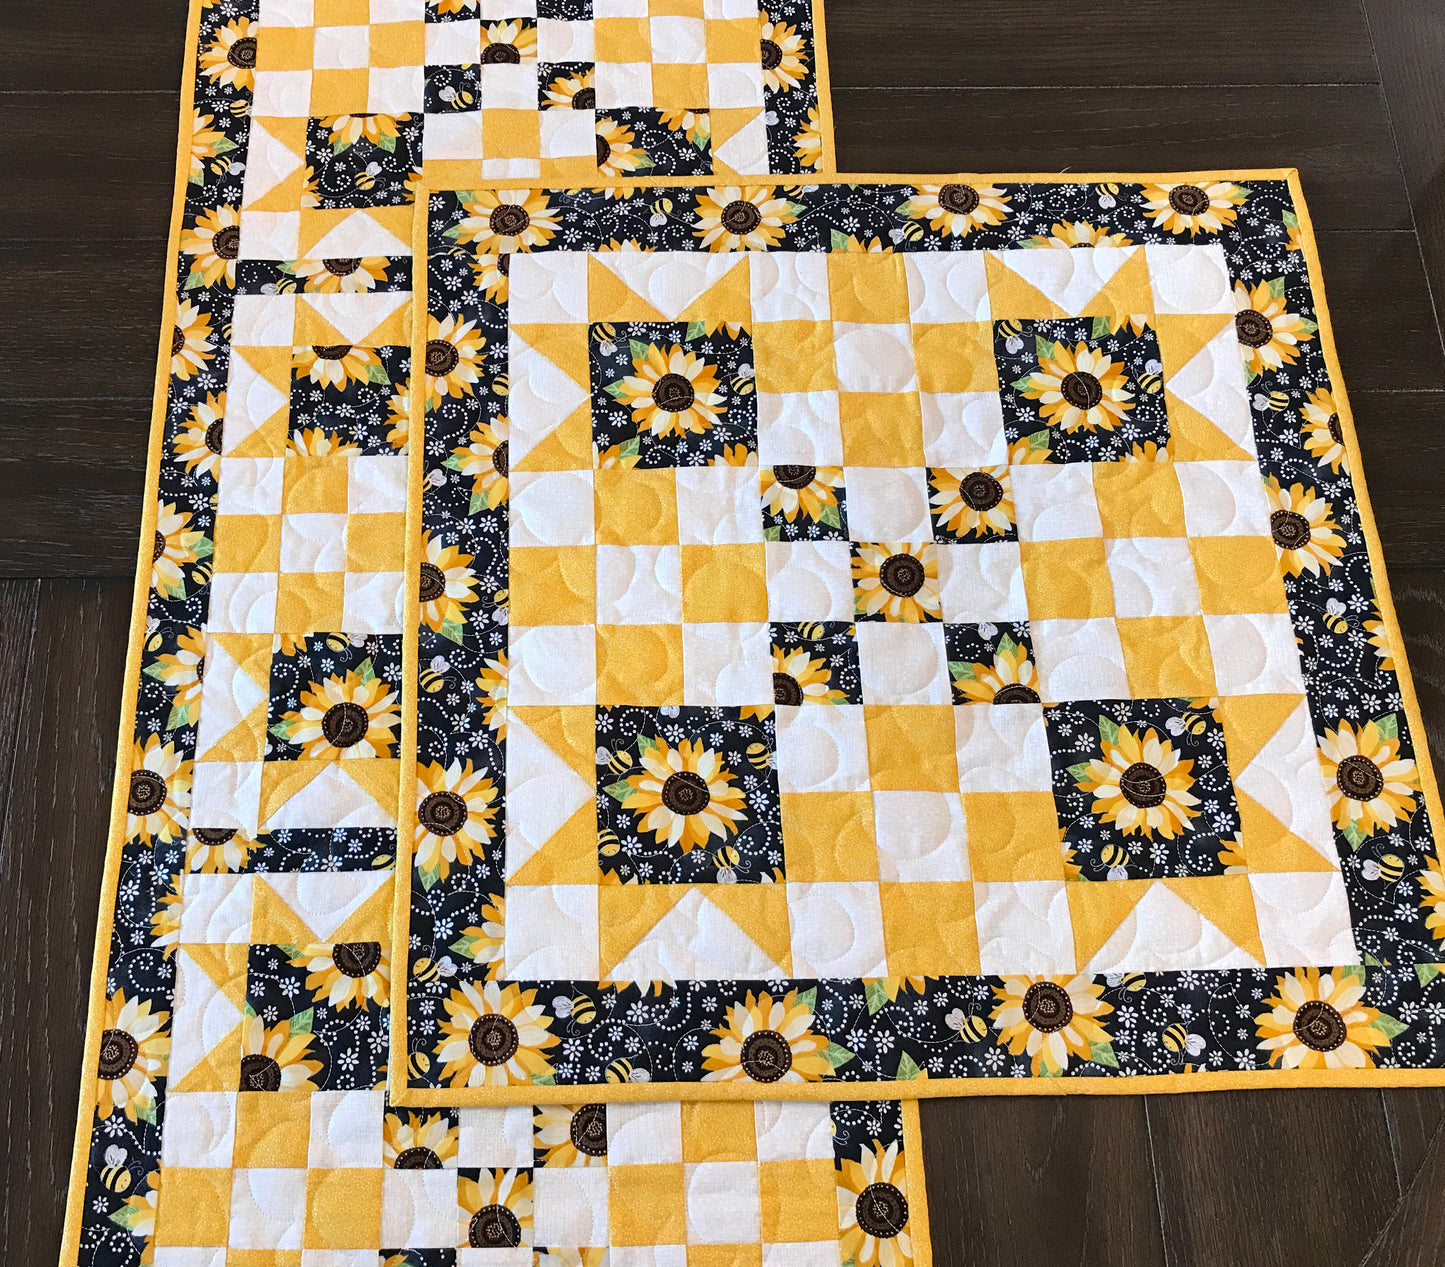 topper and runner on a table for pattern for a table runner or table topper that has sawtooth star corner units with nine patch blocks in between.